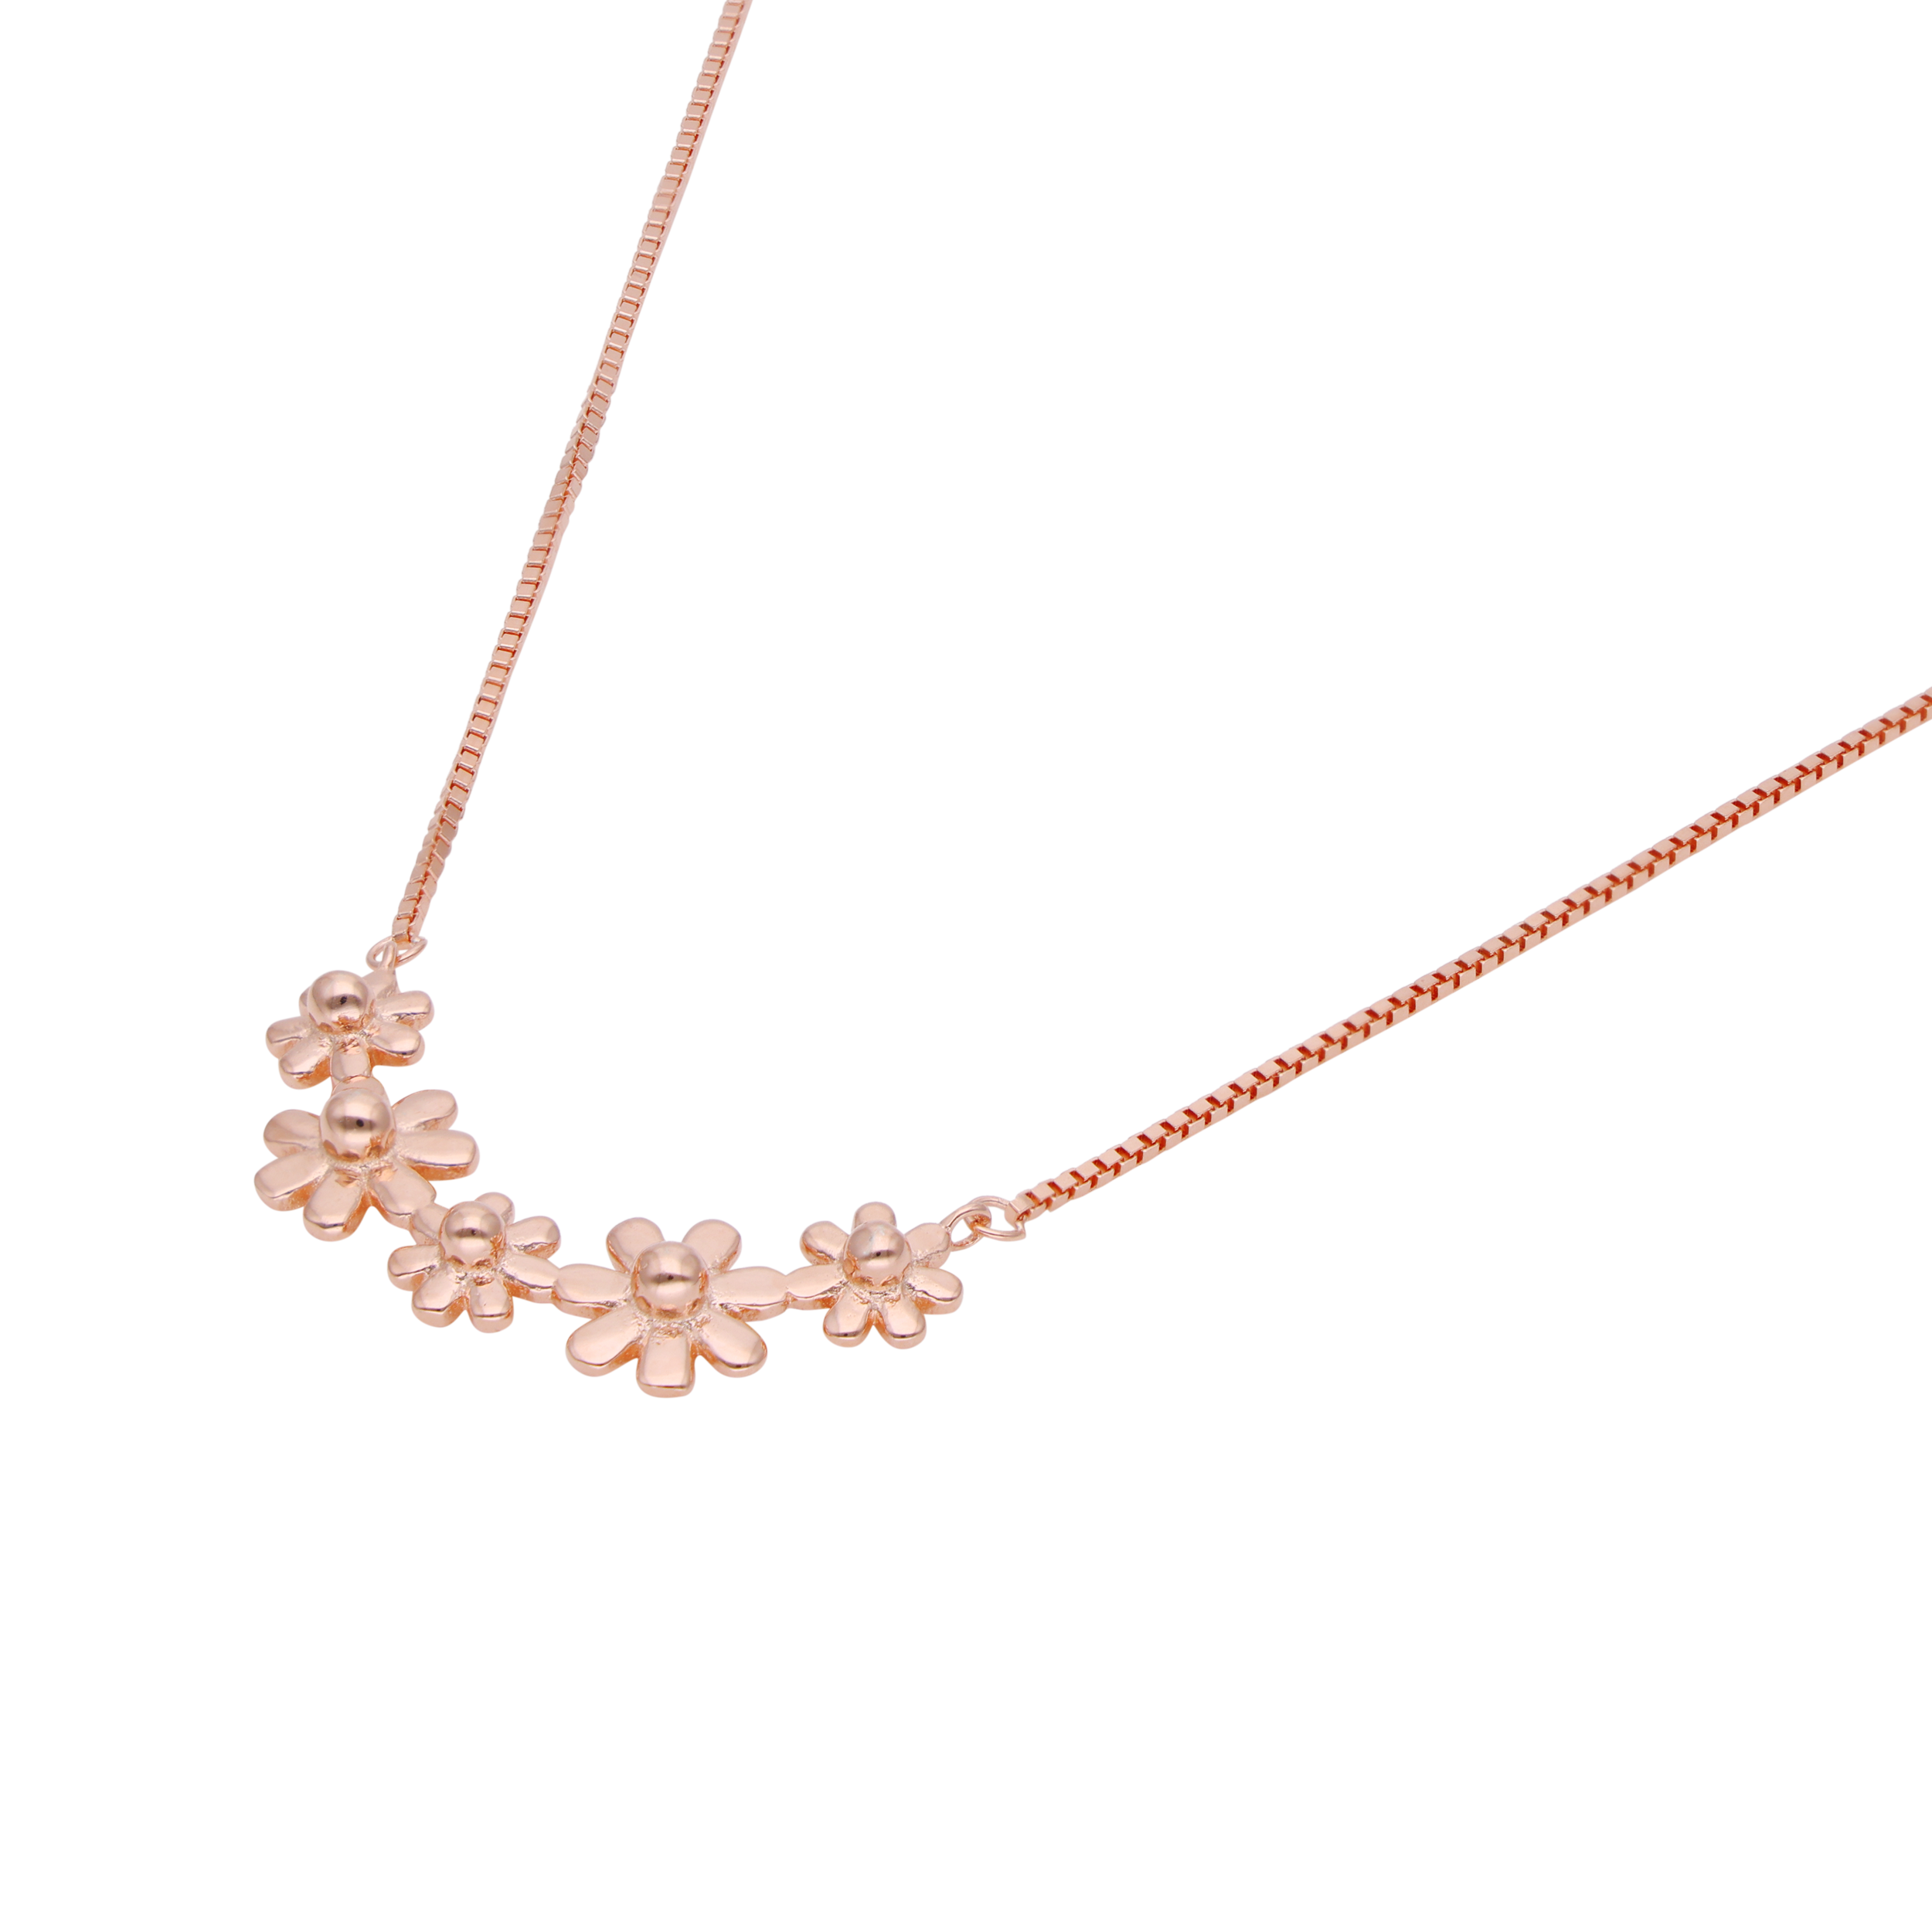 Rose Gold Sterling Silver Chain | SKU : 0002930398, 0002930381, 0002930374